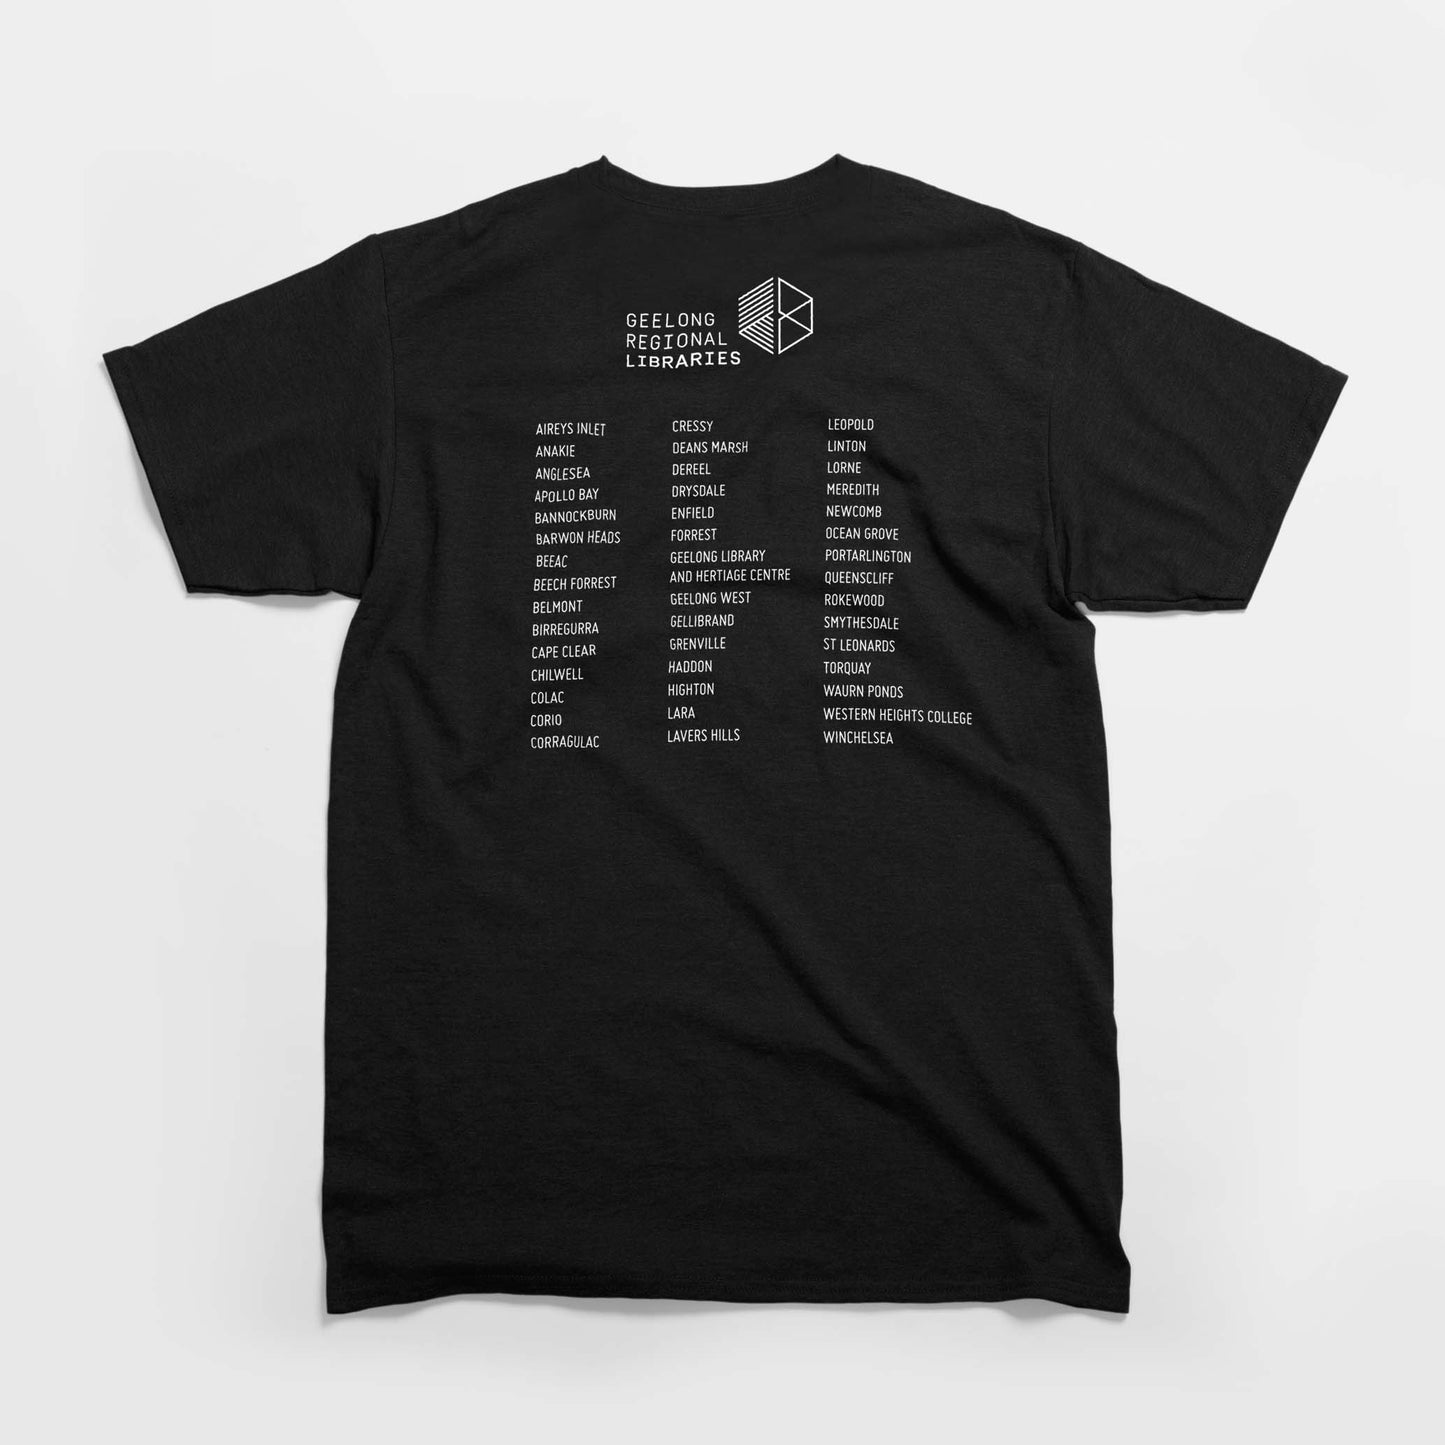 Check It Out T-shirt – Men's (available in black or white)